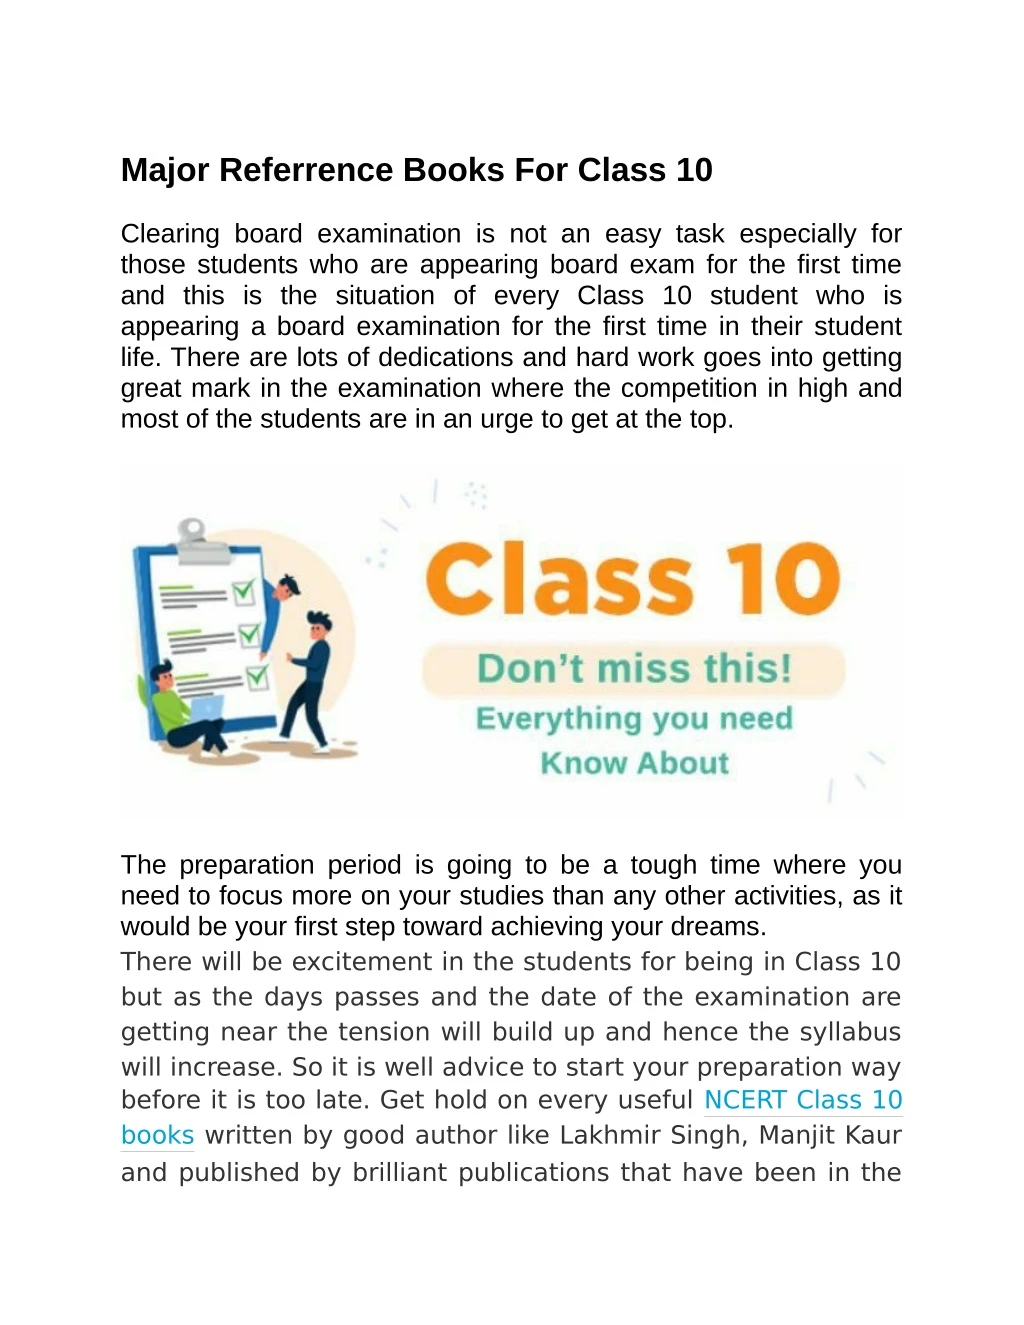 major referrence books for class 10 clearing